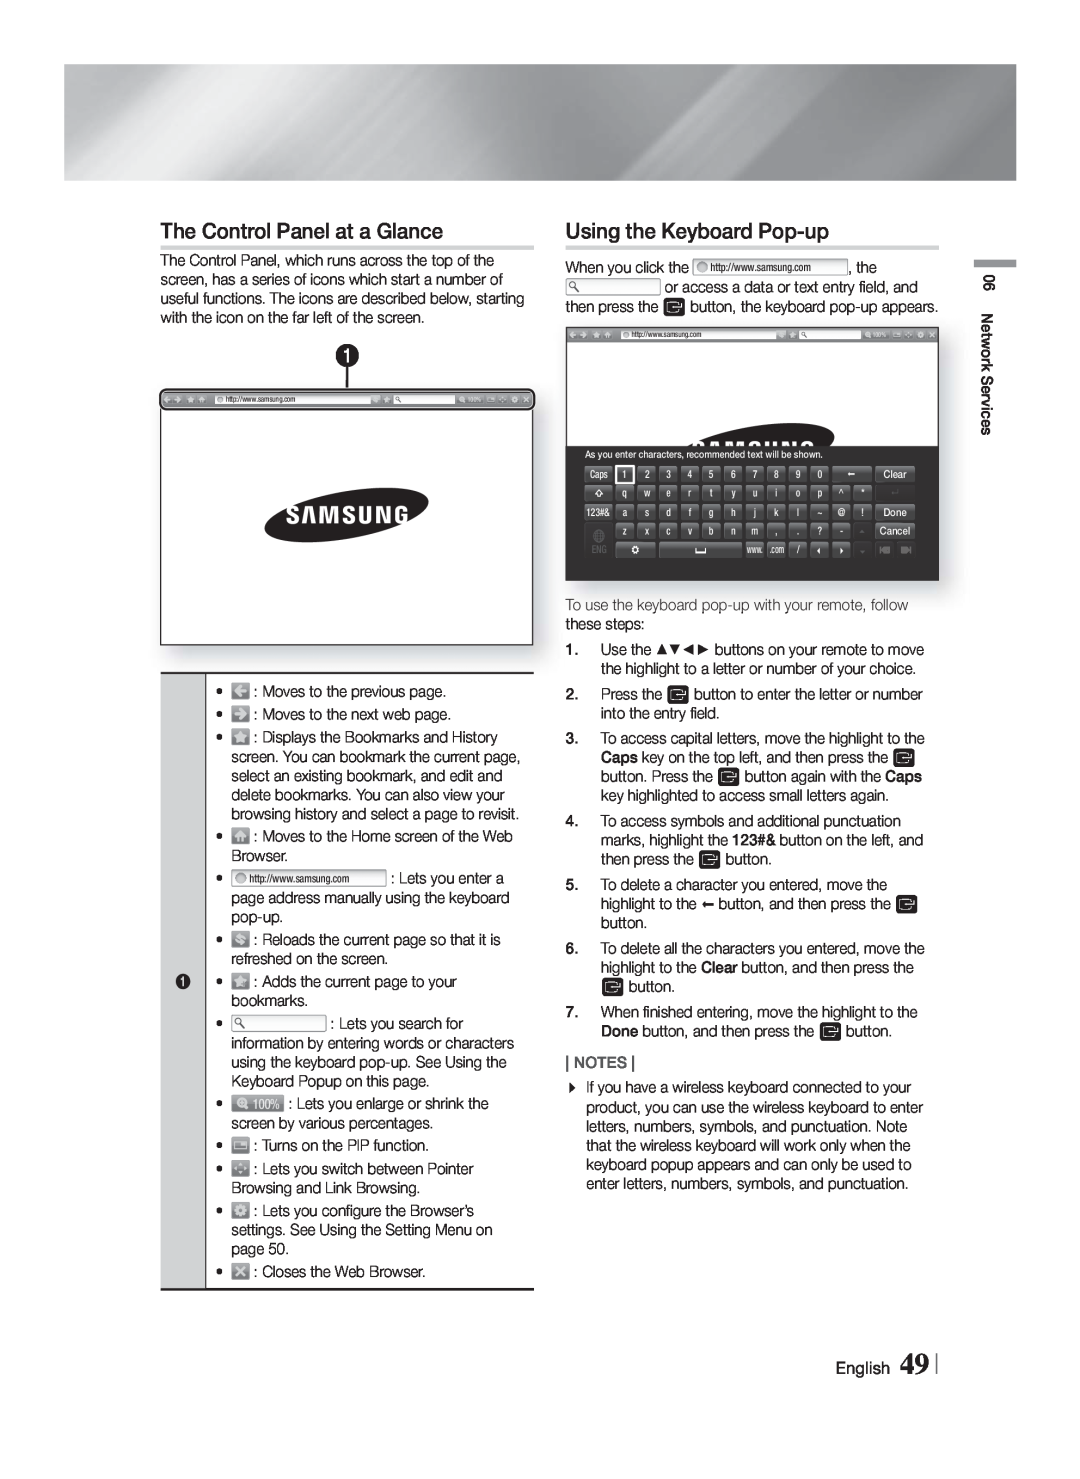 Samsung HT-F9730W/ZA user manual The Control Panel at a Glance, Using the Keyboard Pop-up, English 49, Notes 